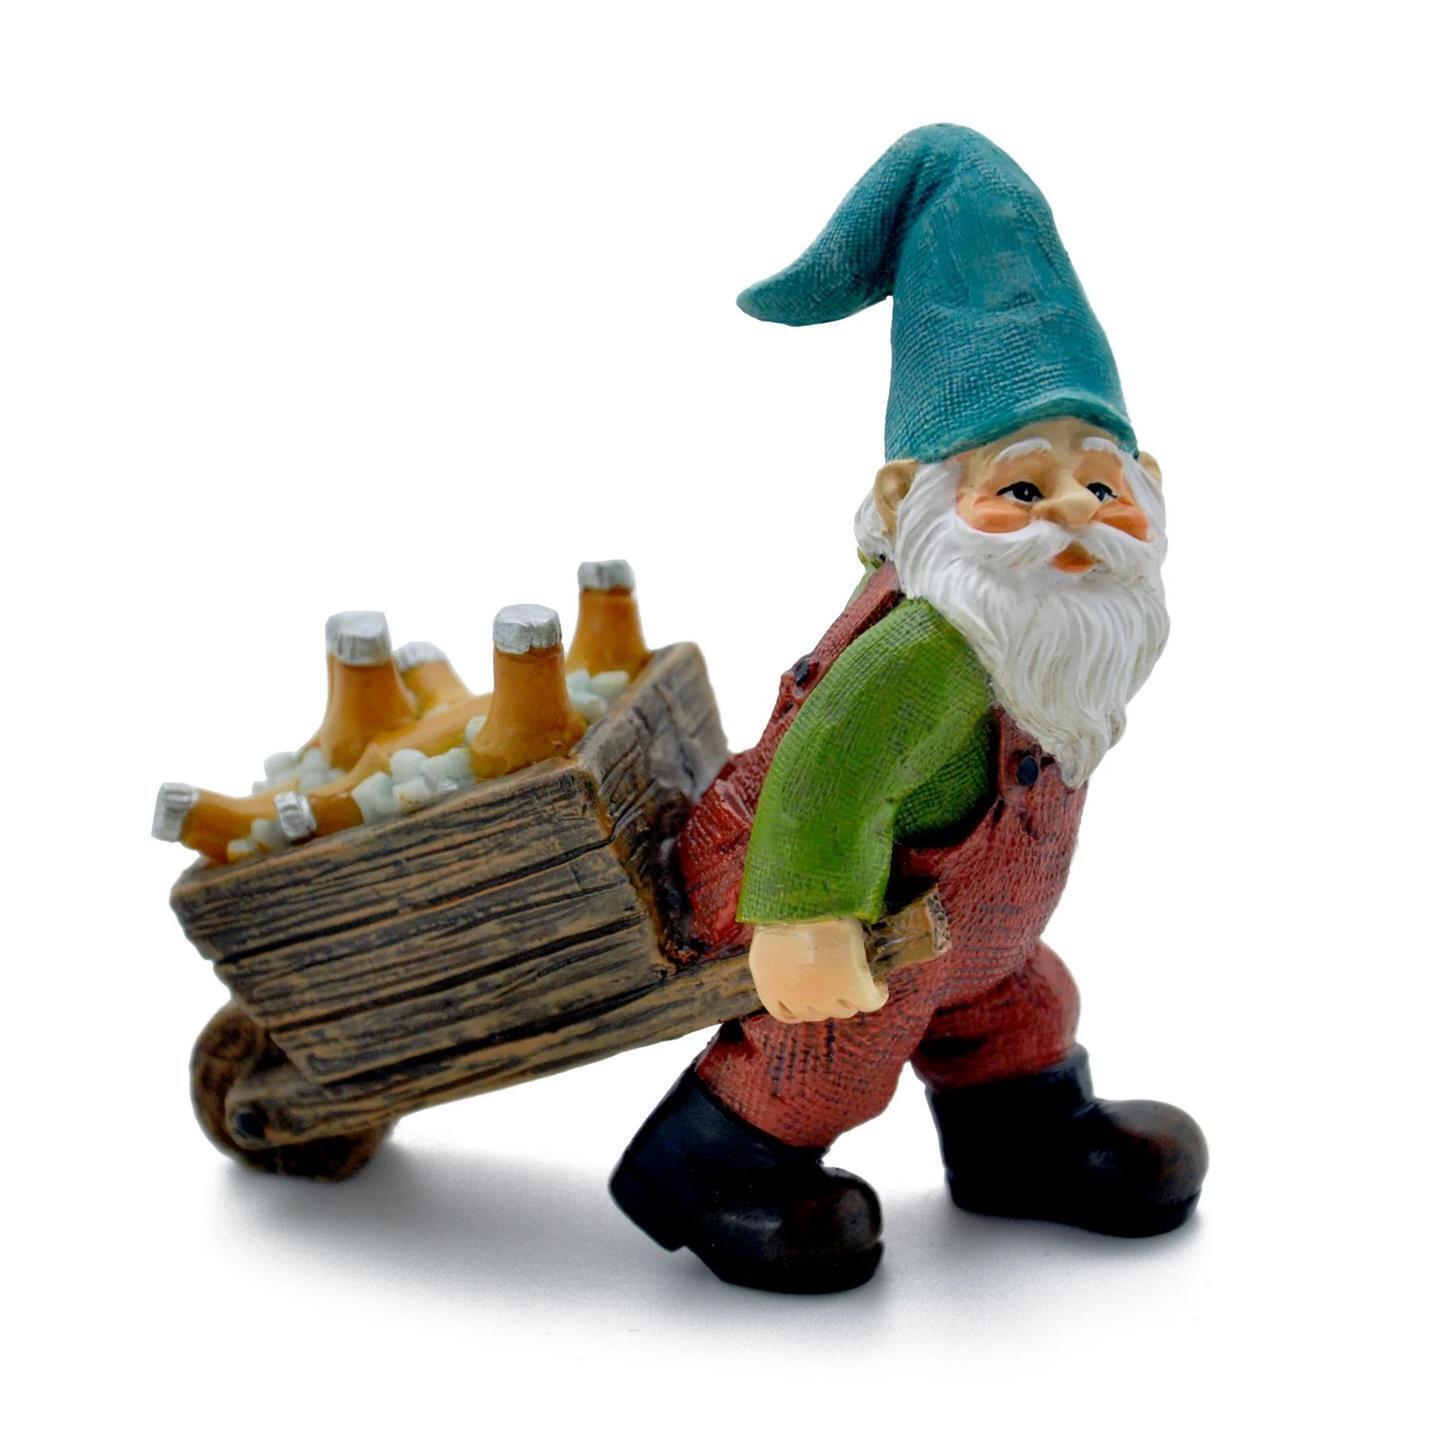 Miniature Fairy Garden Gnome Pulling Beer Cart - Buy 3 Save $5